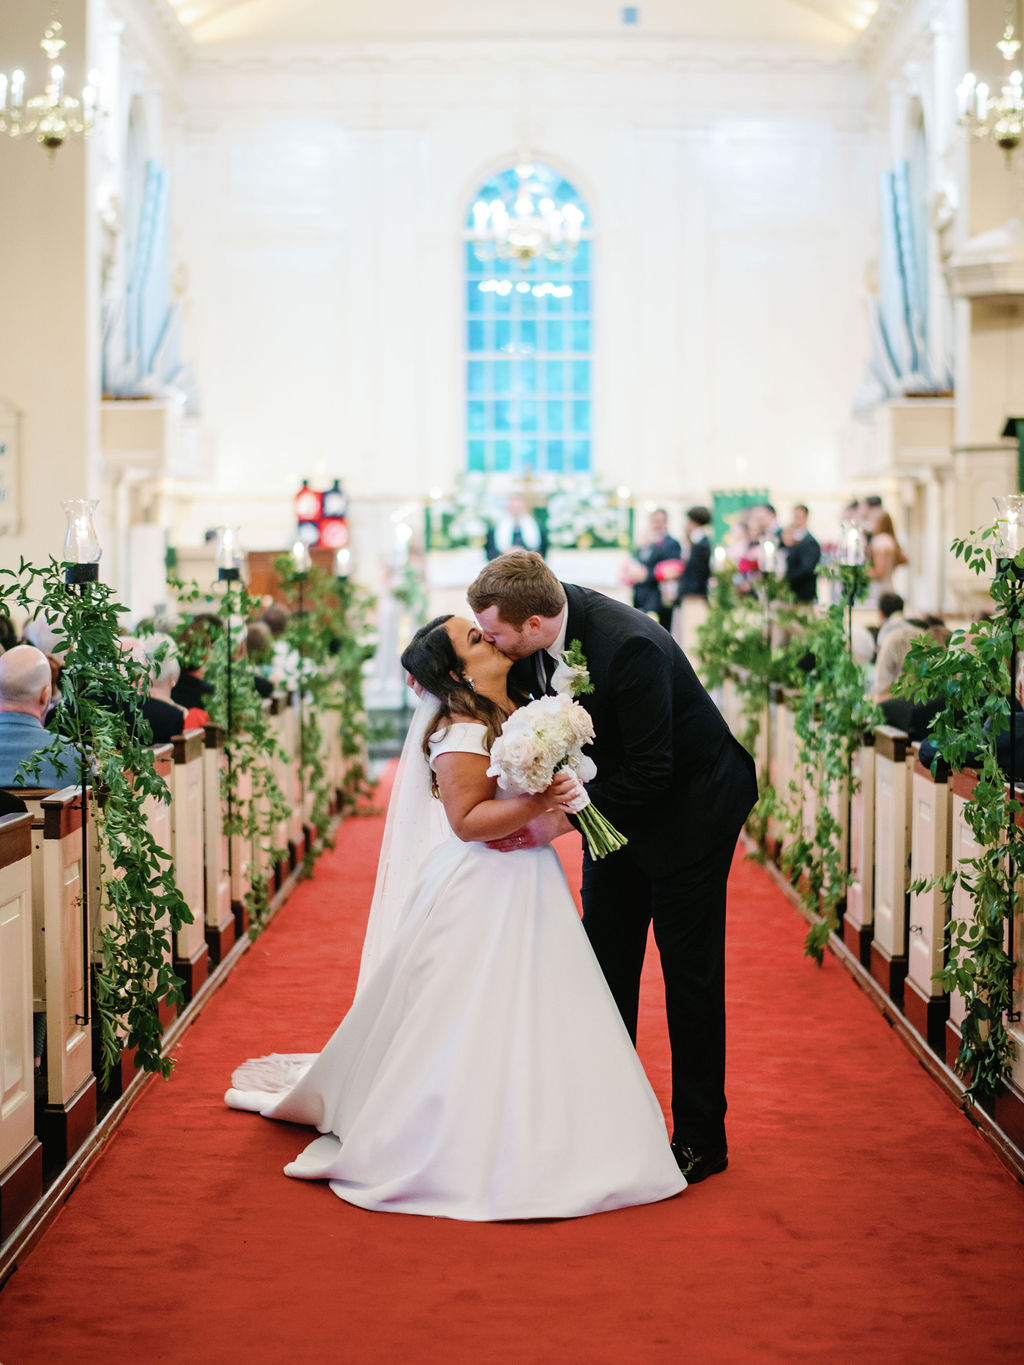 Couple kissing in aisle after getting married in chapel